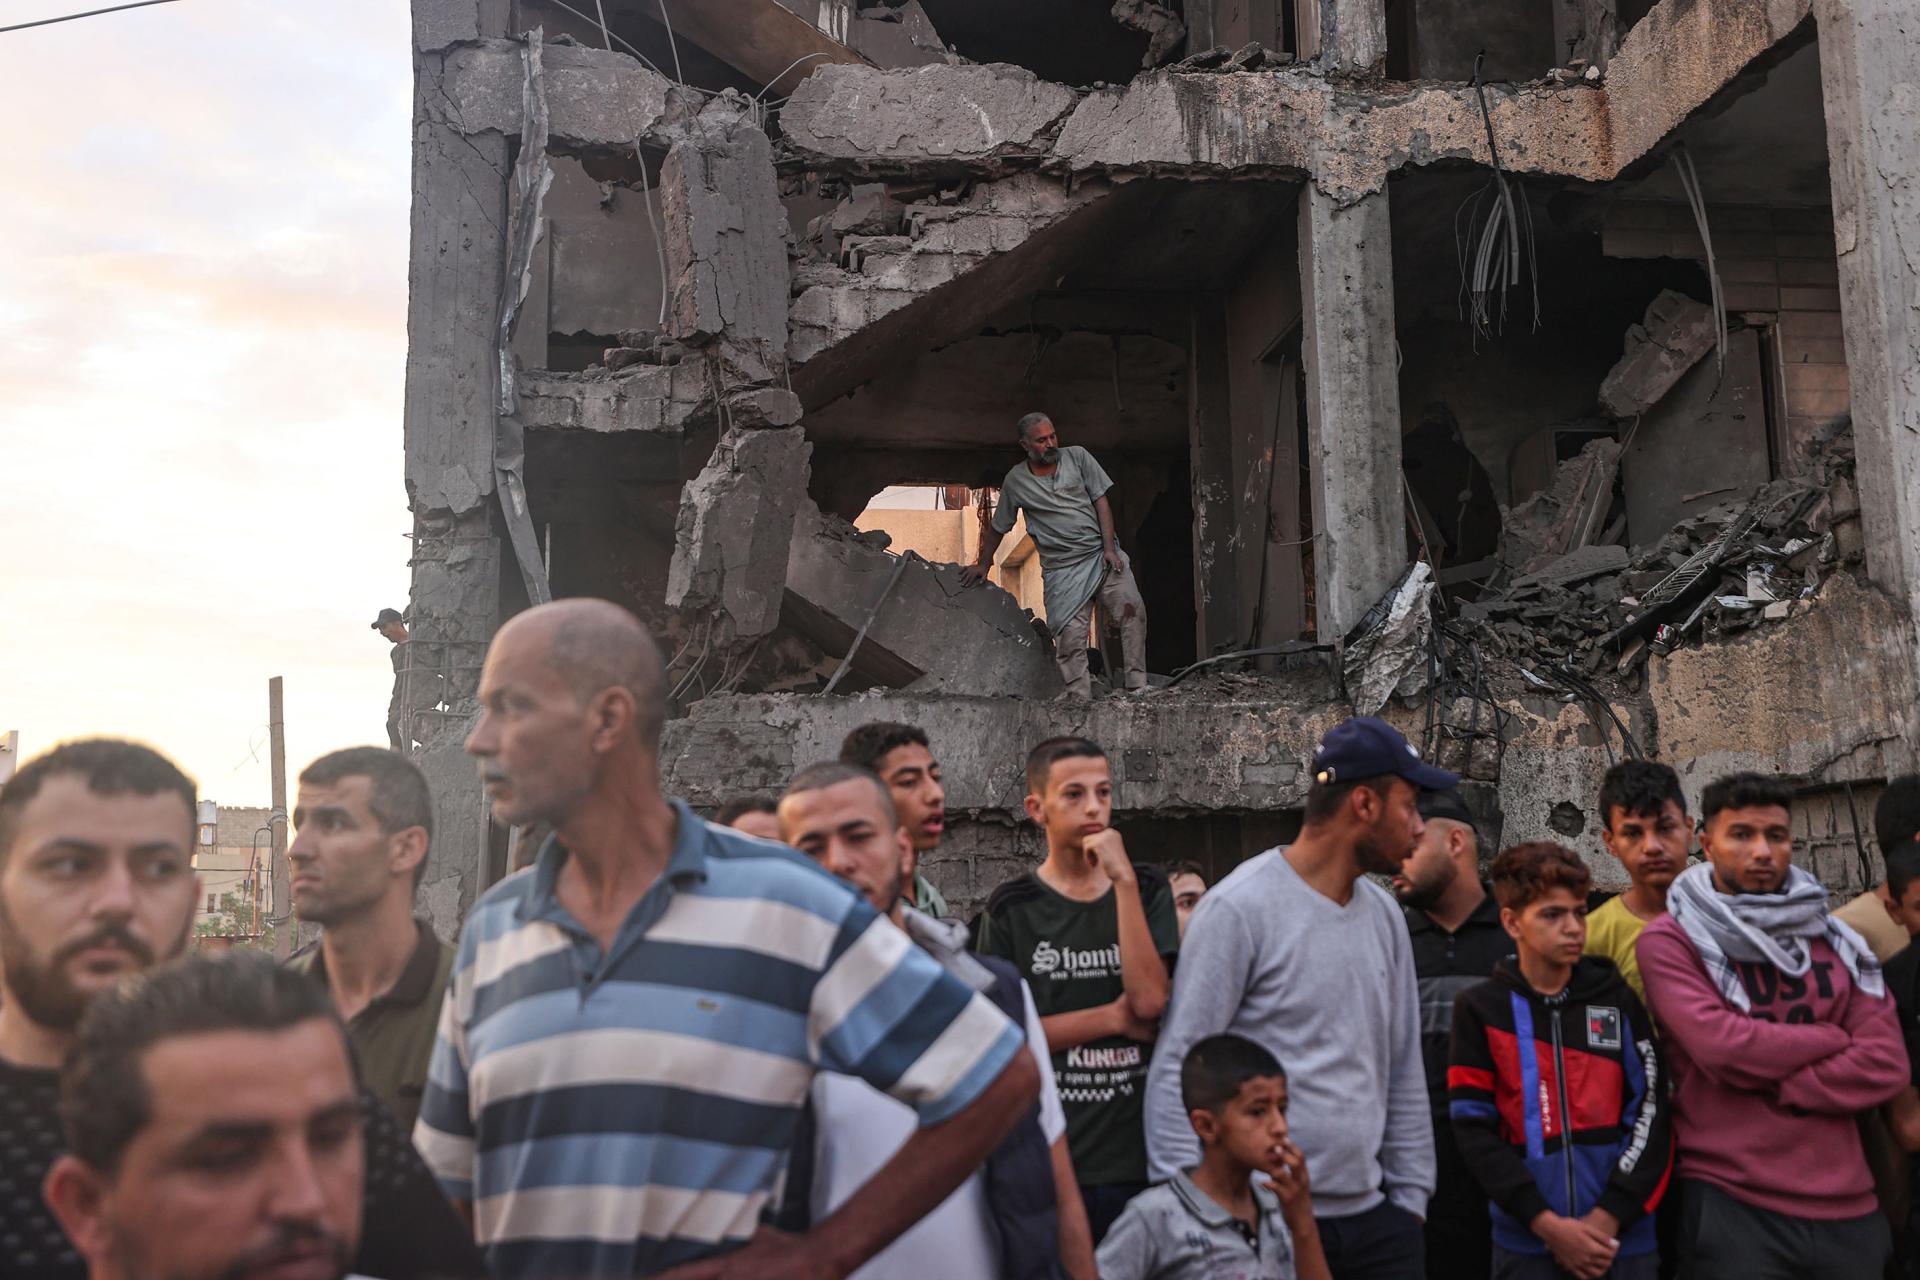 New York Photography Awards Winner - The Israeli-Palestinian conflict